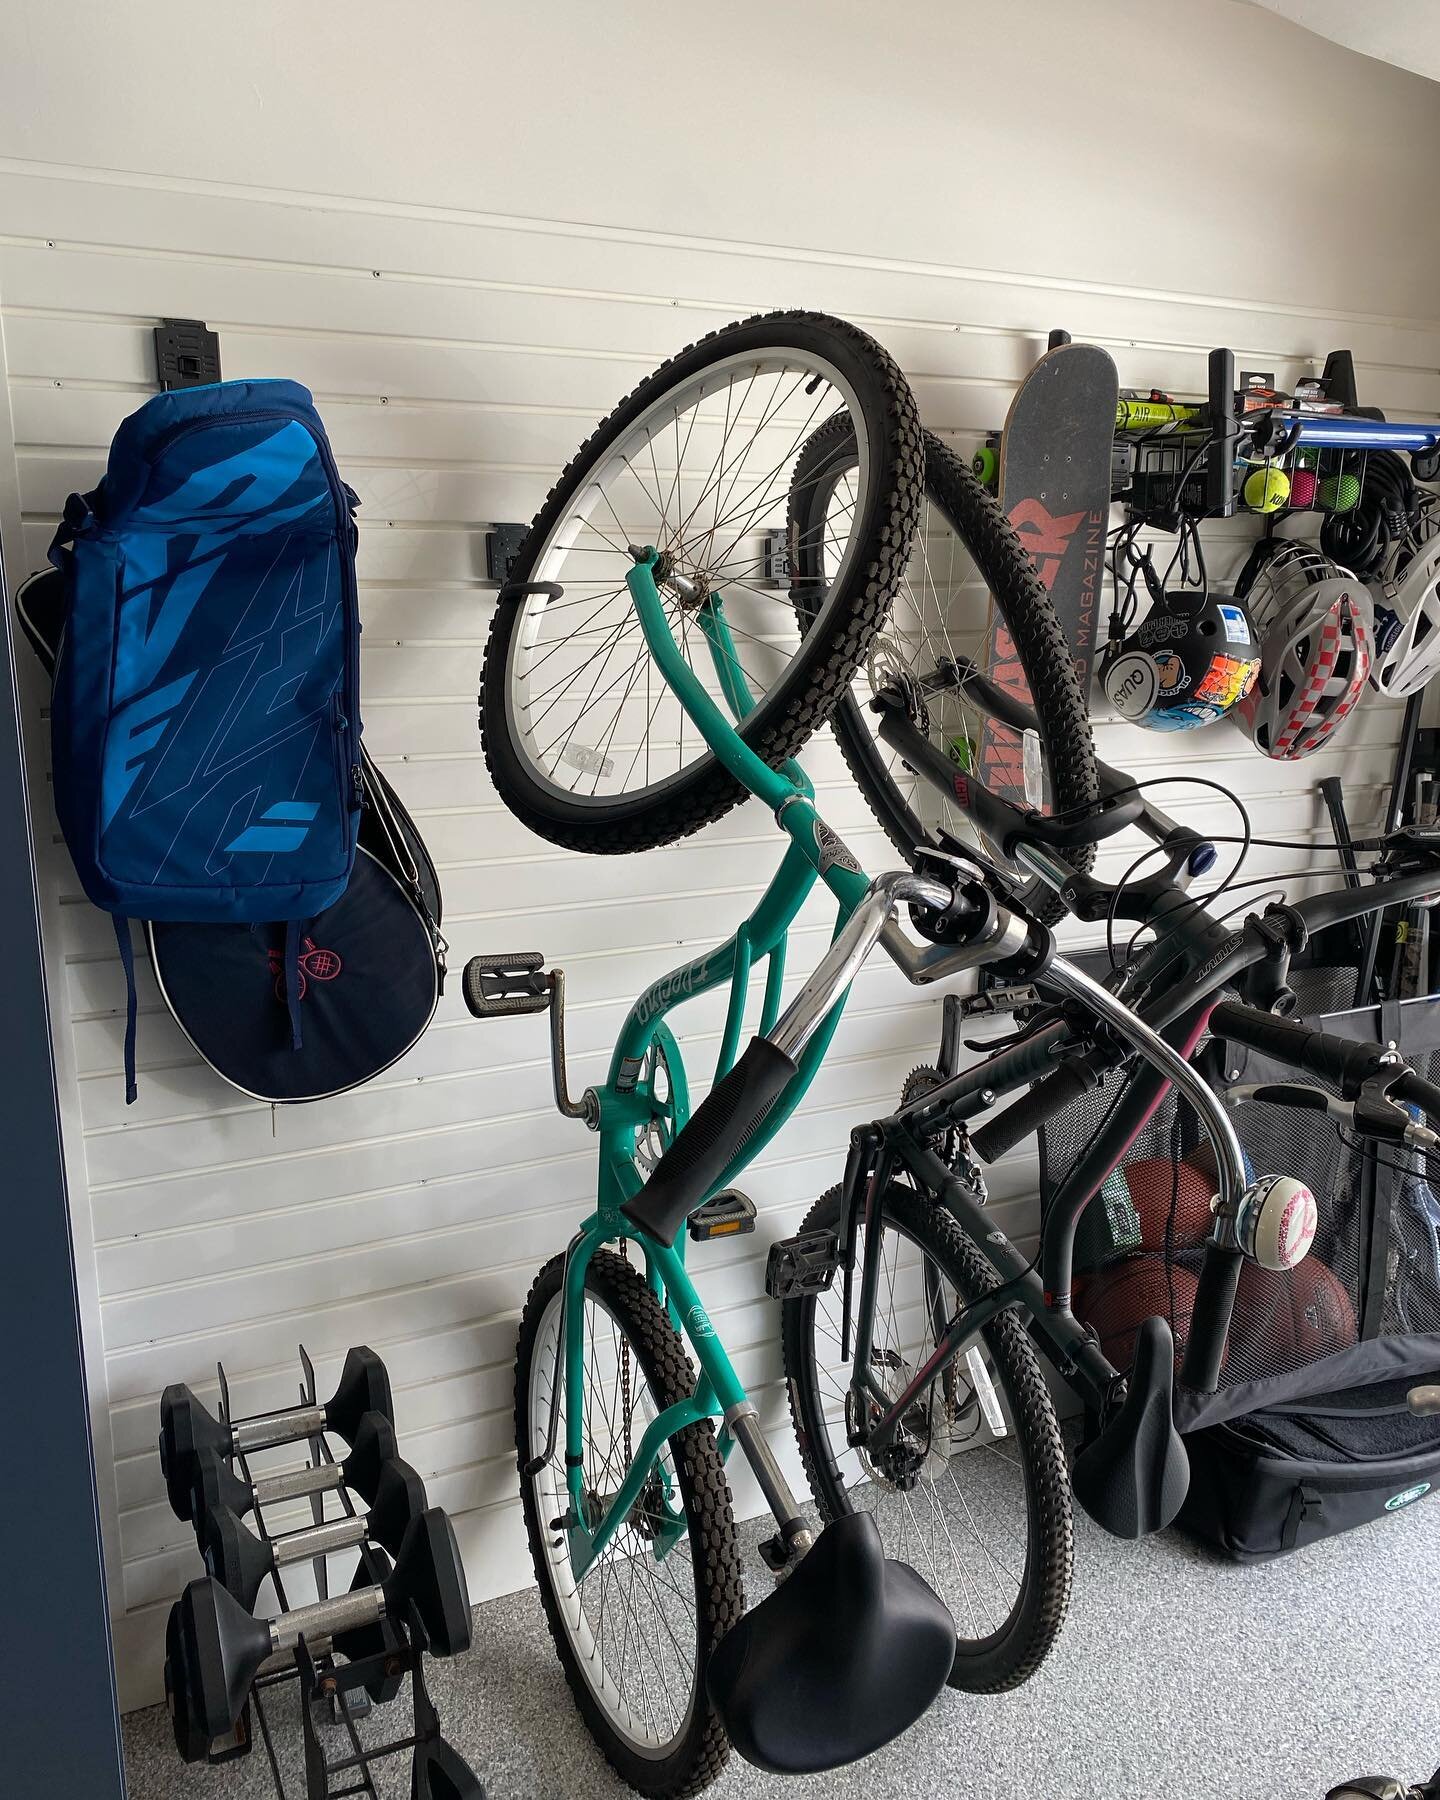 Man I LOVE a slat wall! The most versatile storage solution for regularly used items. 

#springcleaning #garageorganization #slatwall #bikestorage #theefficiencyproject